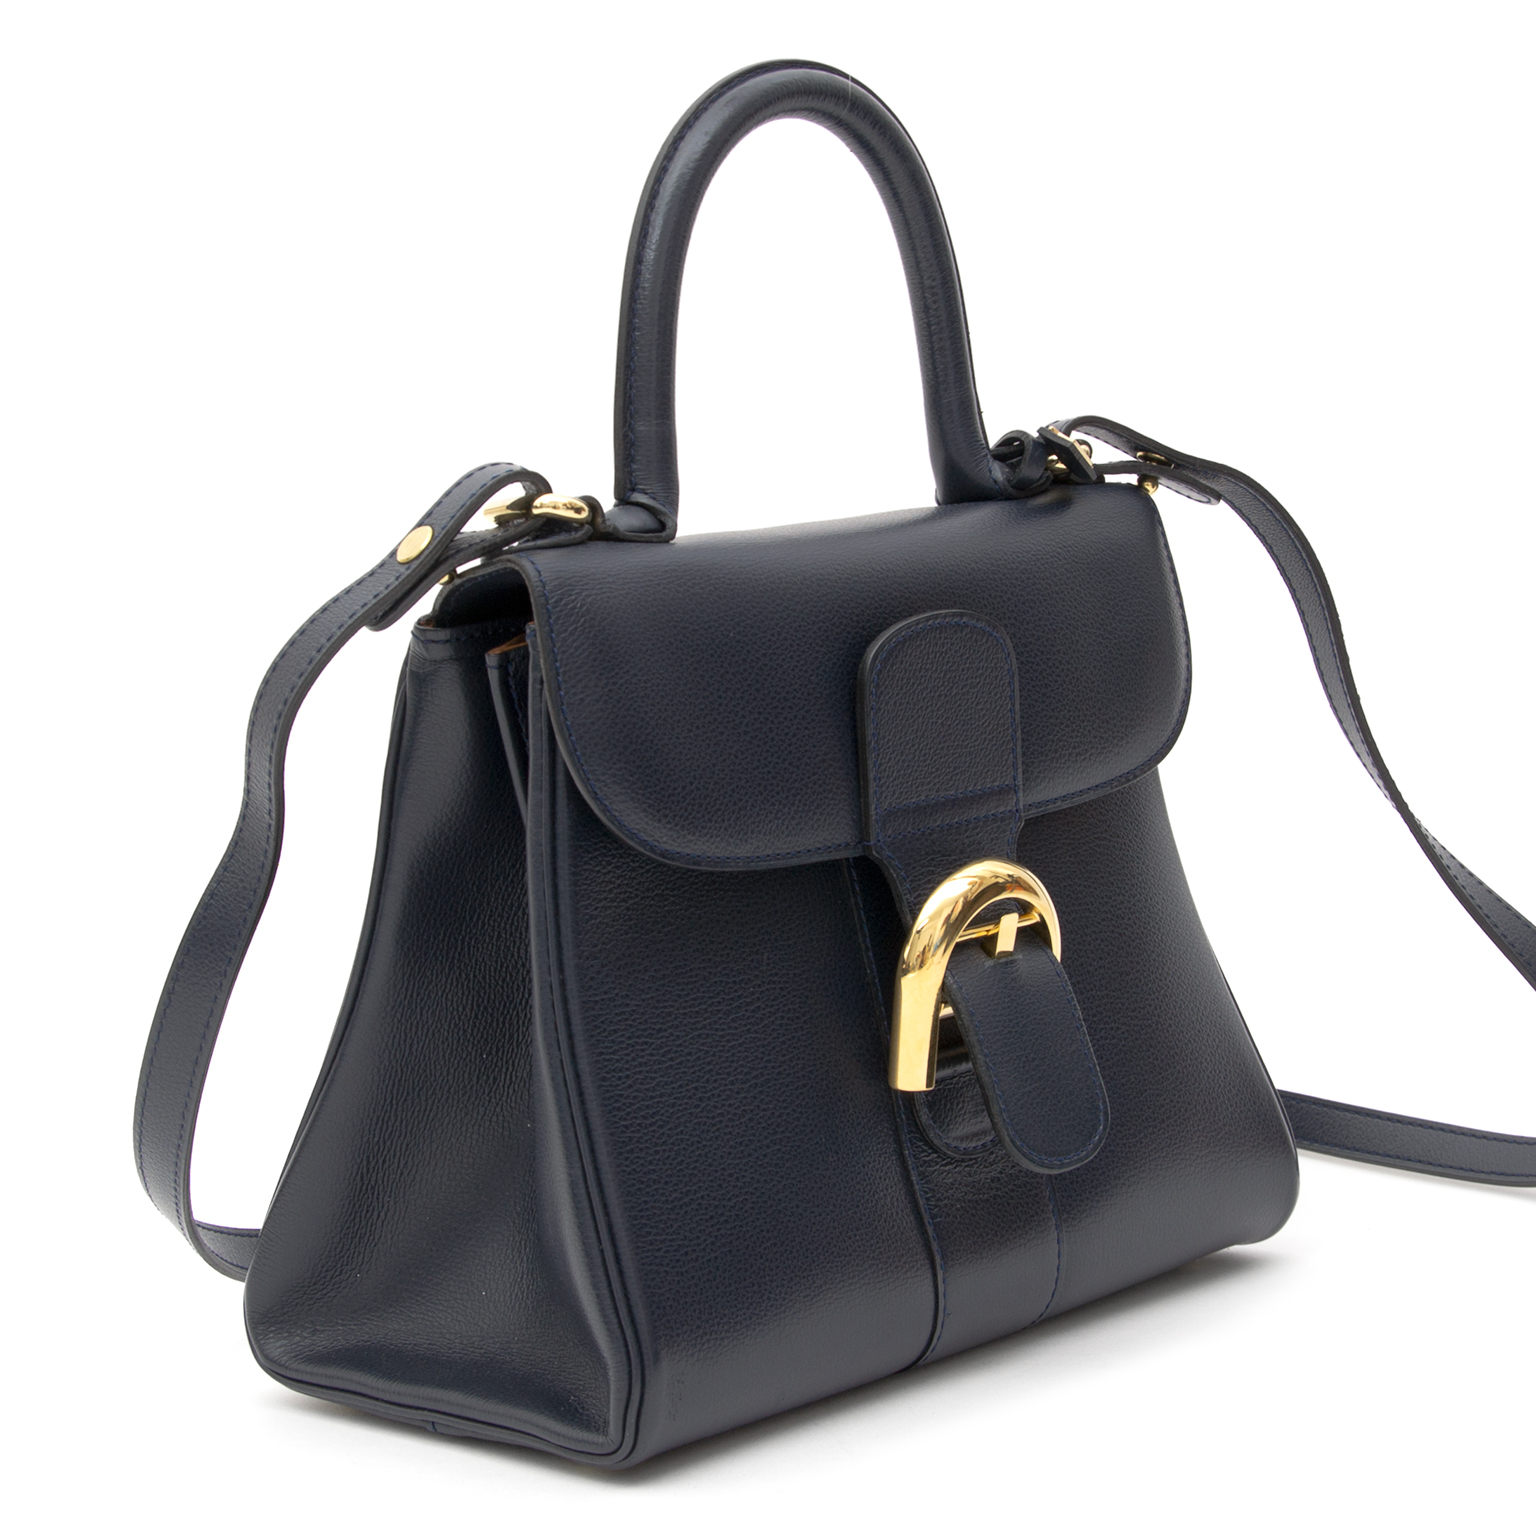 Brillant leather handbag Delvaux Navy in Leather - 34336886